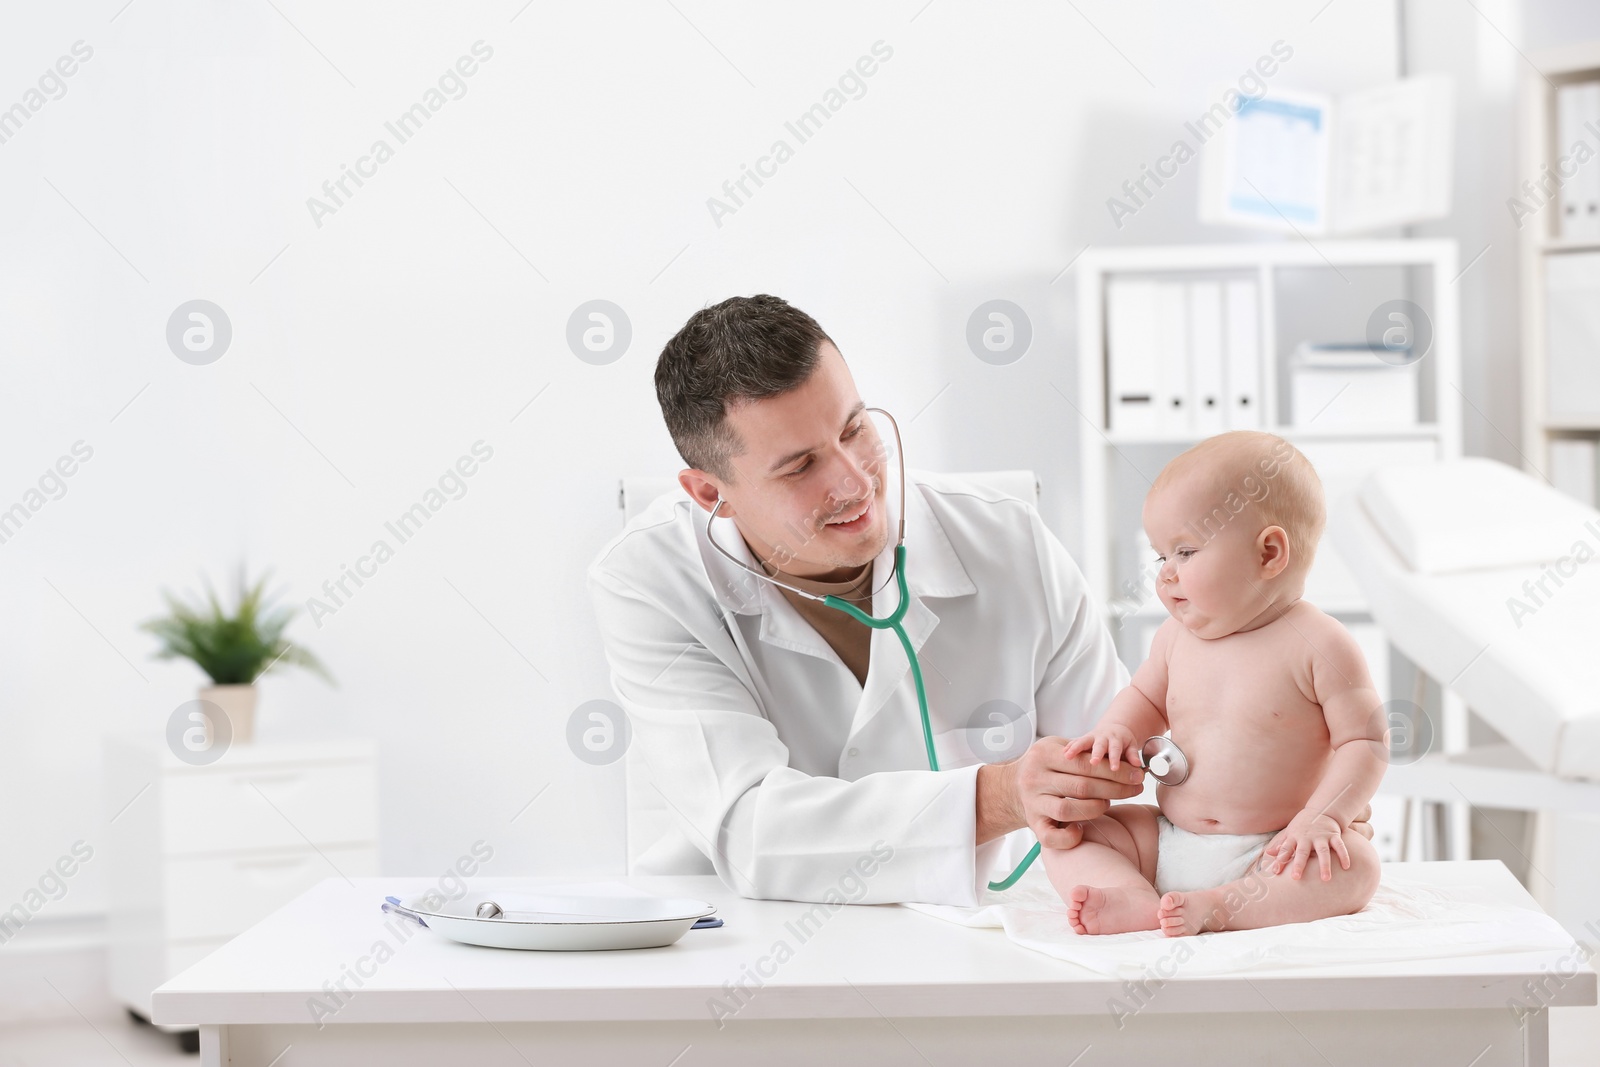 Photo of Children's doctor examining baby with stethoscope in hospital